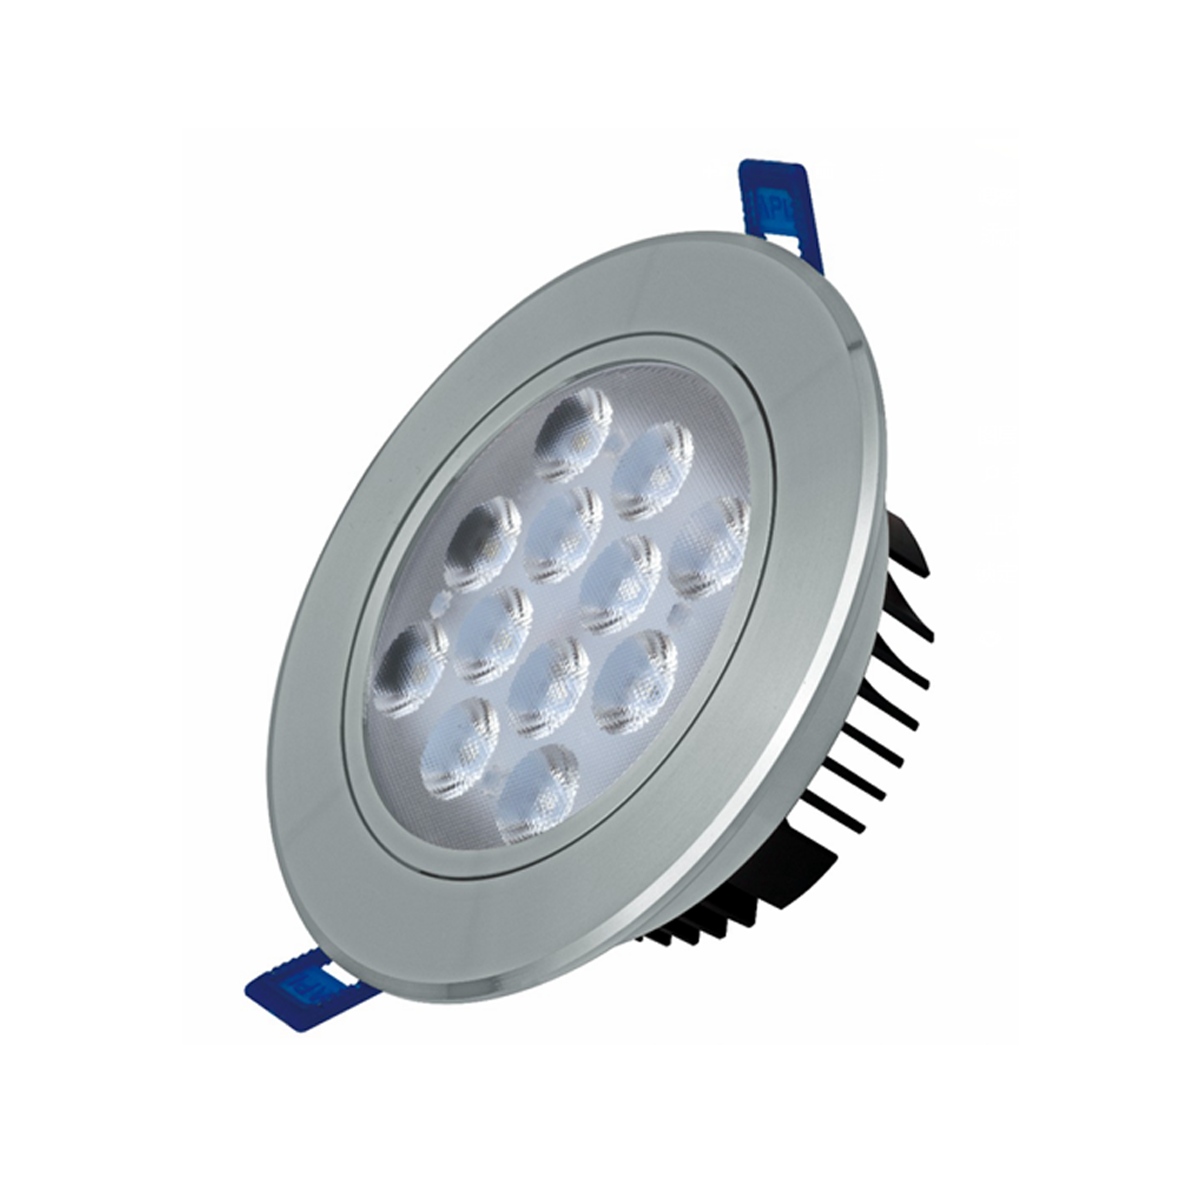 Dimmable Led Ceiling light smd Led Downlight